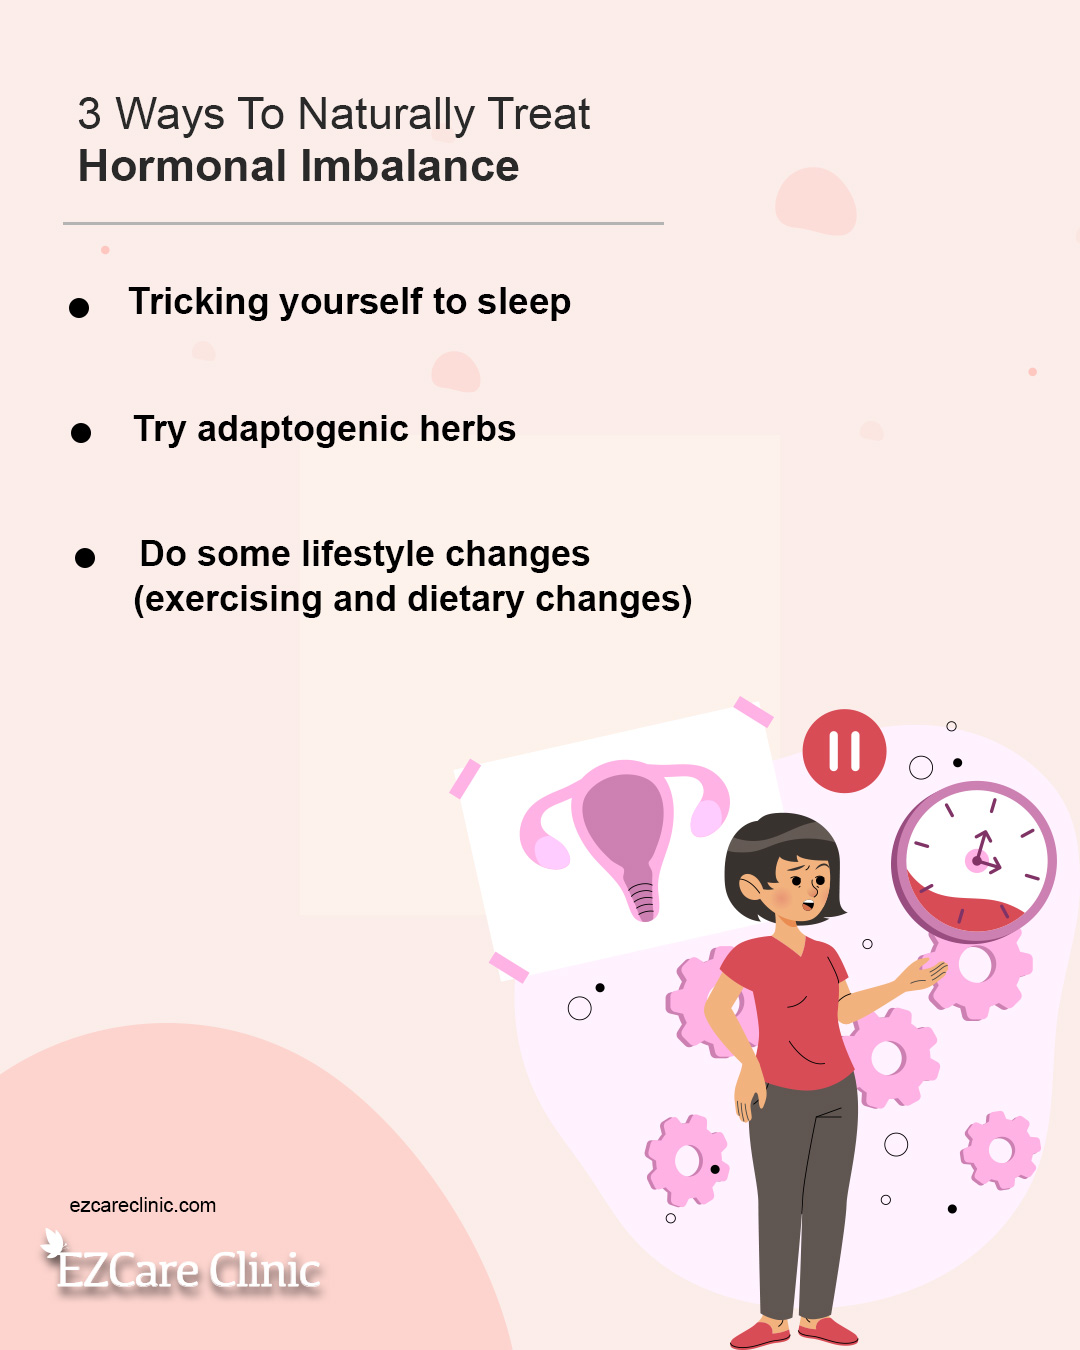 5 Signs Indicating You Have a Hormonal Imbalance